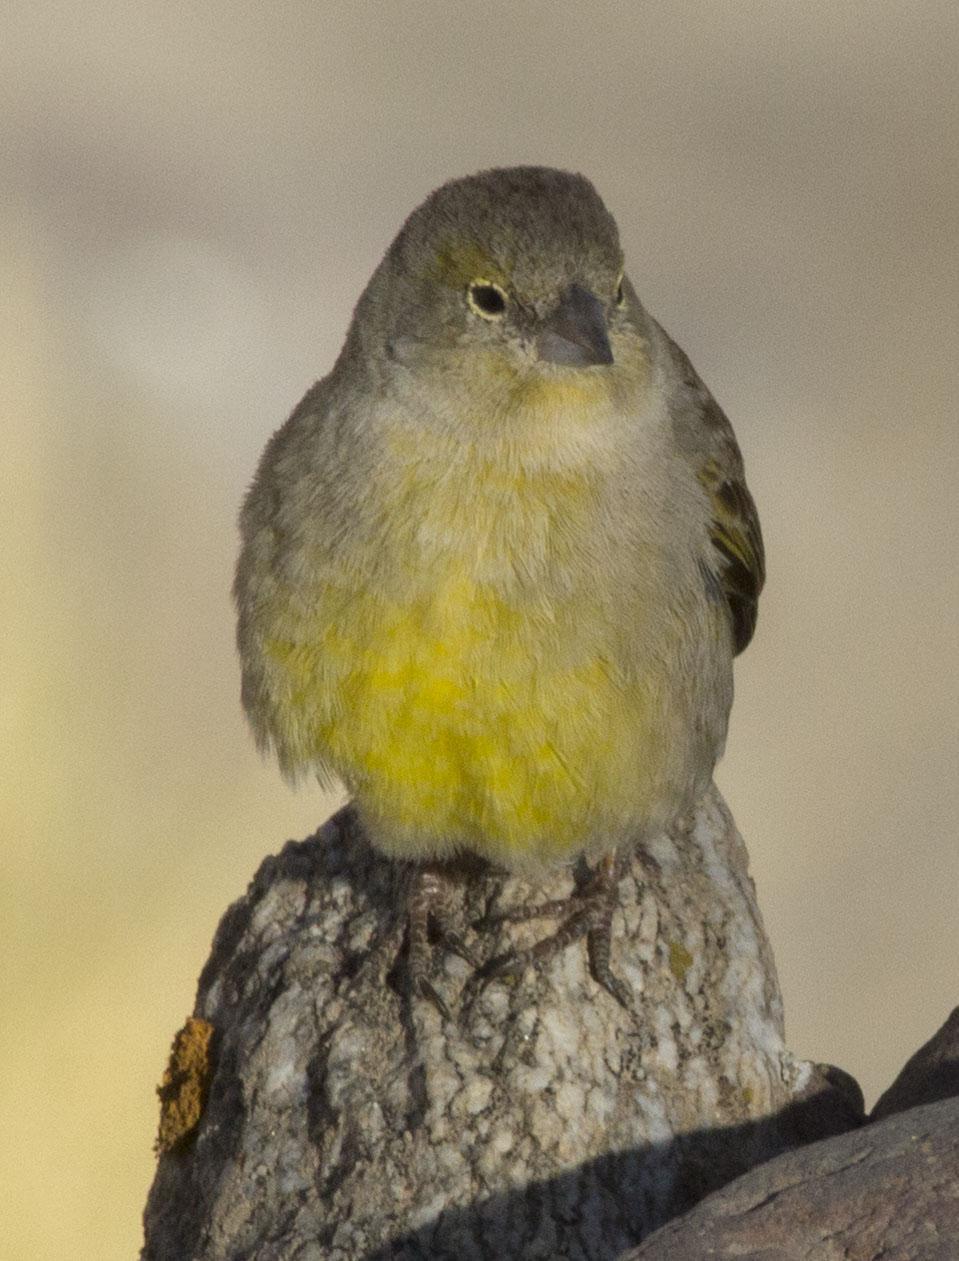 Grassland Yellow-Finch Photo by Lee Harding